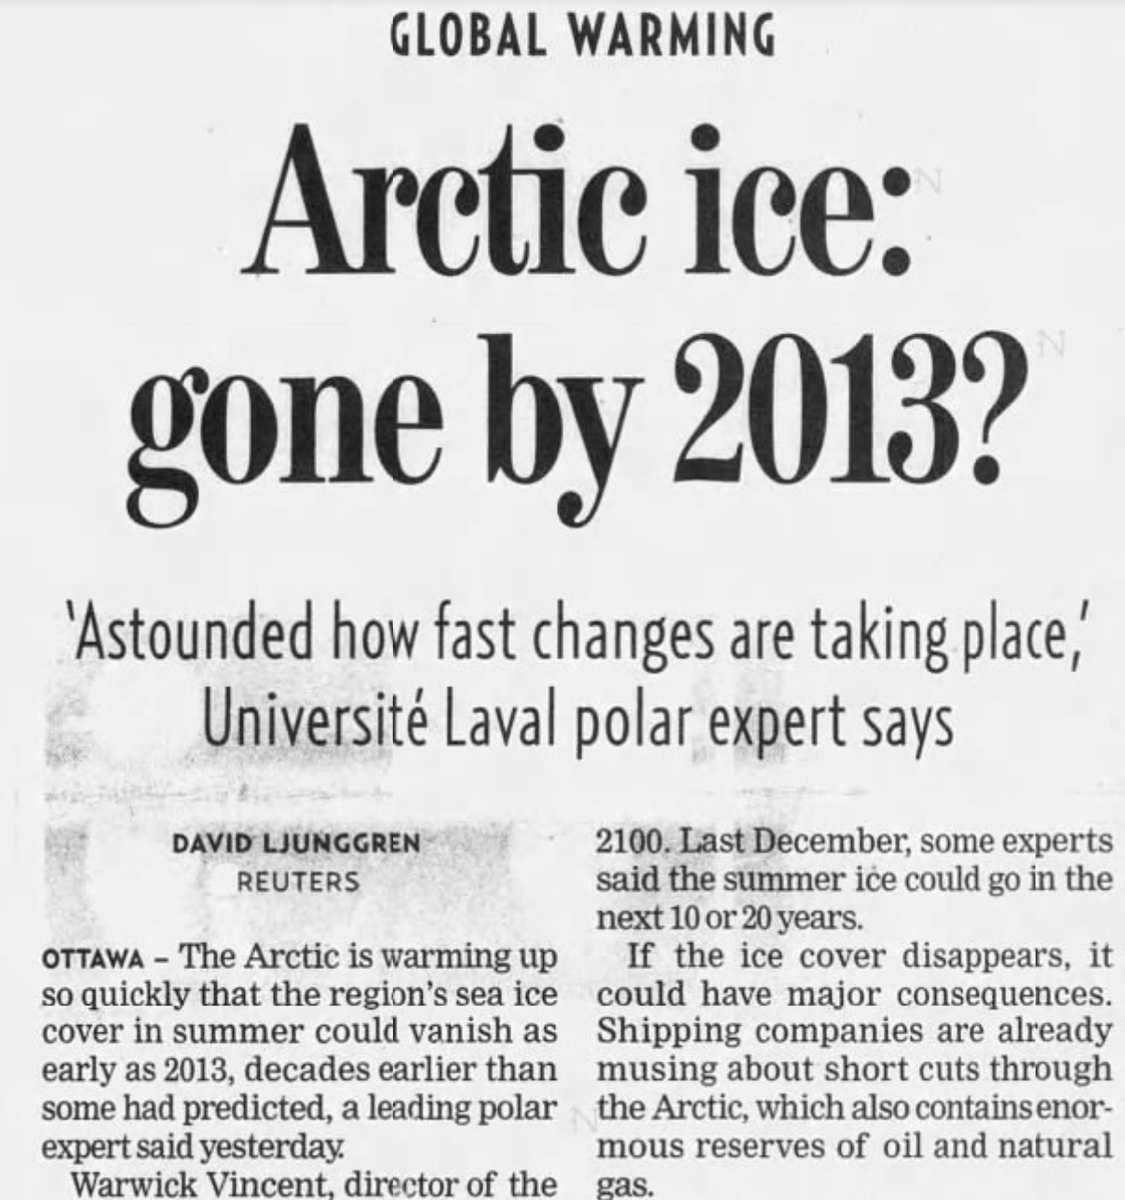 Climate hoax rescheduled. Unashamed of their failed ice-free-Arctic-by-2013 prediction, climate hoaxers move back the date to the mid-2030s in hopes of extending the biggest hoax of all time for another 10-15 years. nytimes.com/2023/06/06/cli…